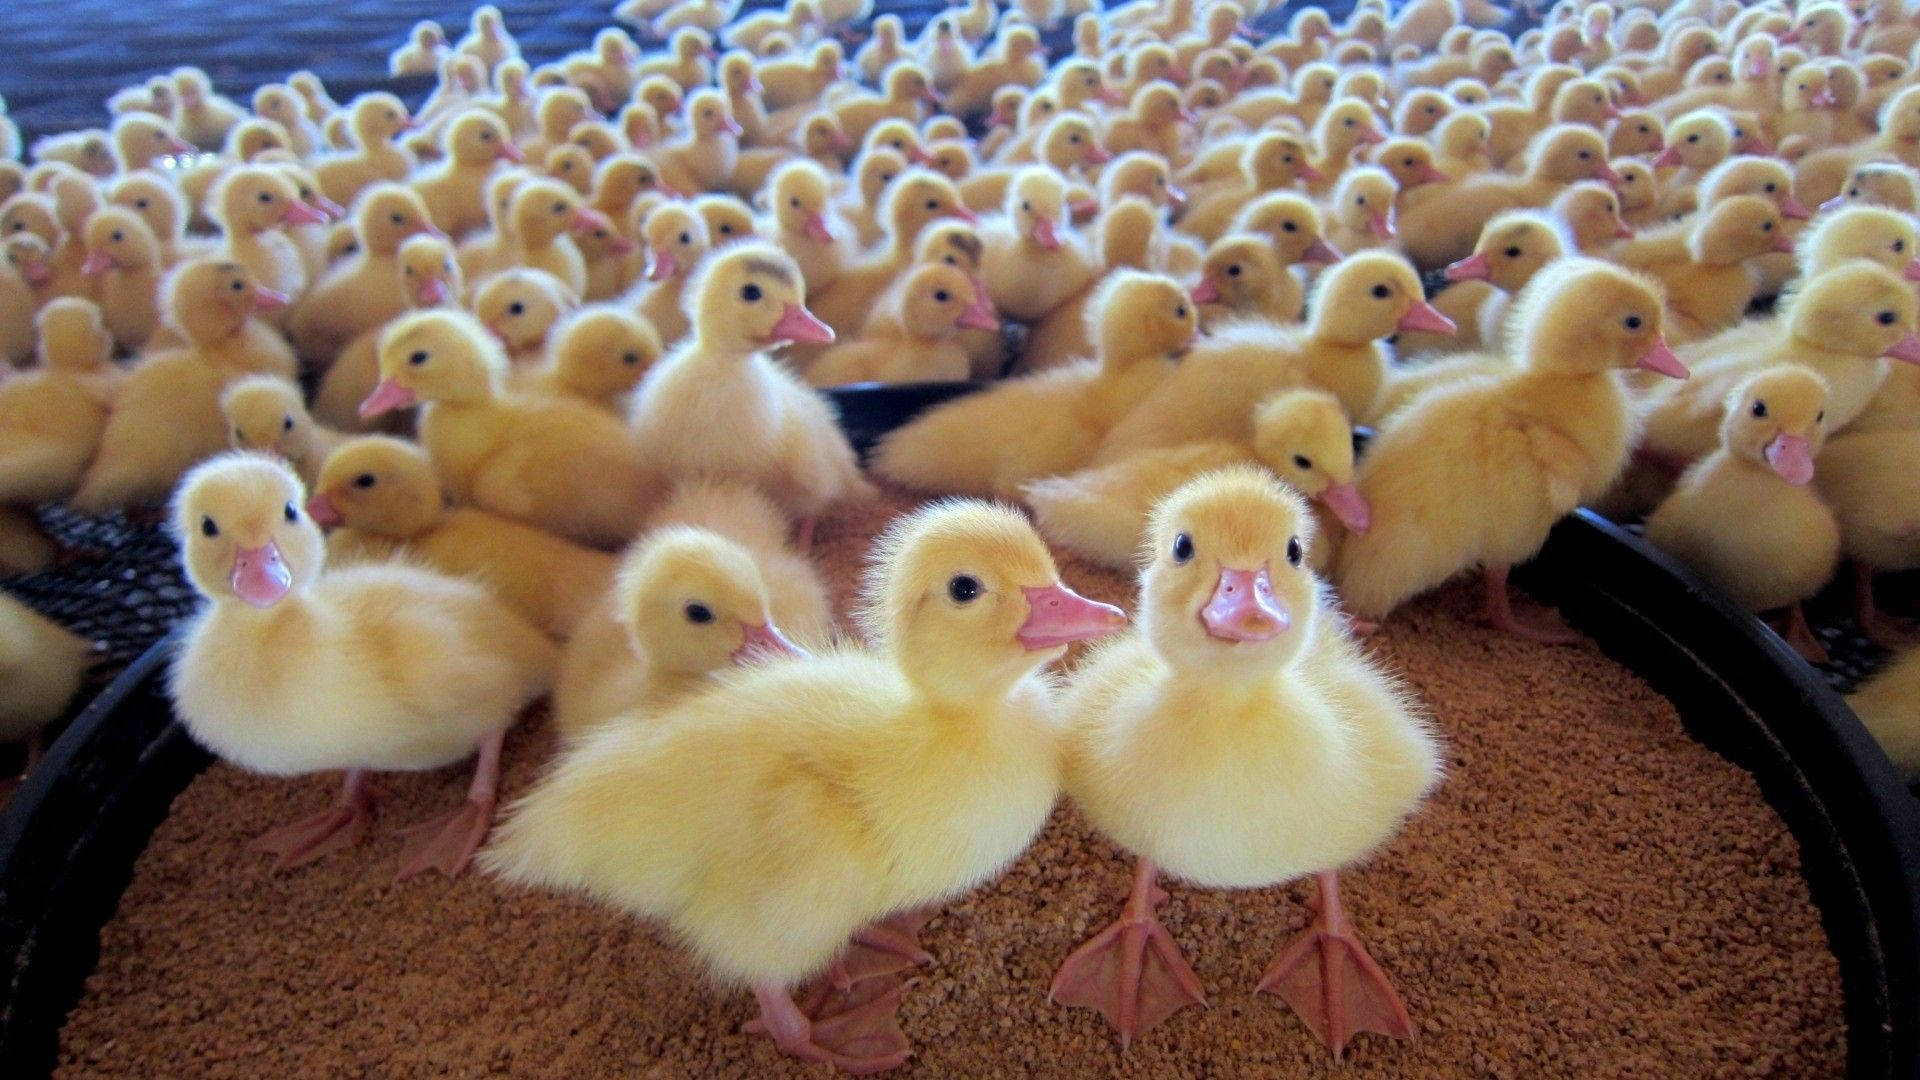 Crowded Baby Ducks Background